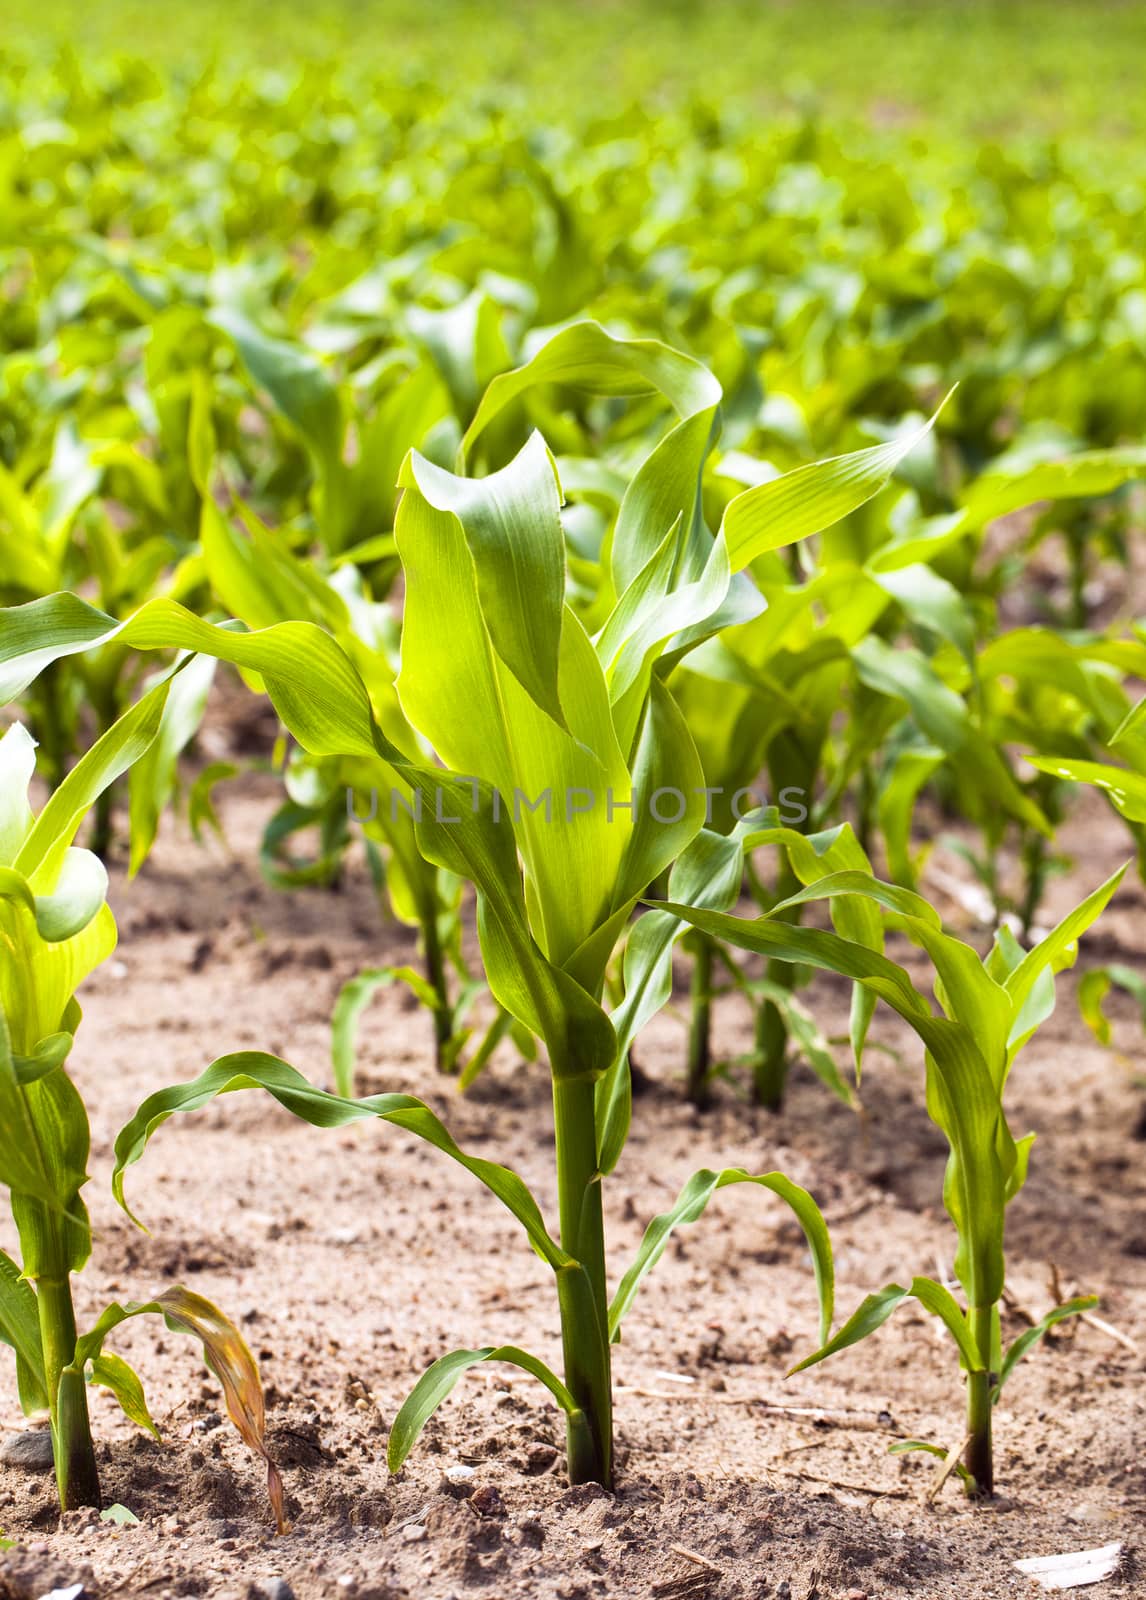  the small sprouts of corn growing on an agricultural field. focus on the foreground